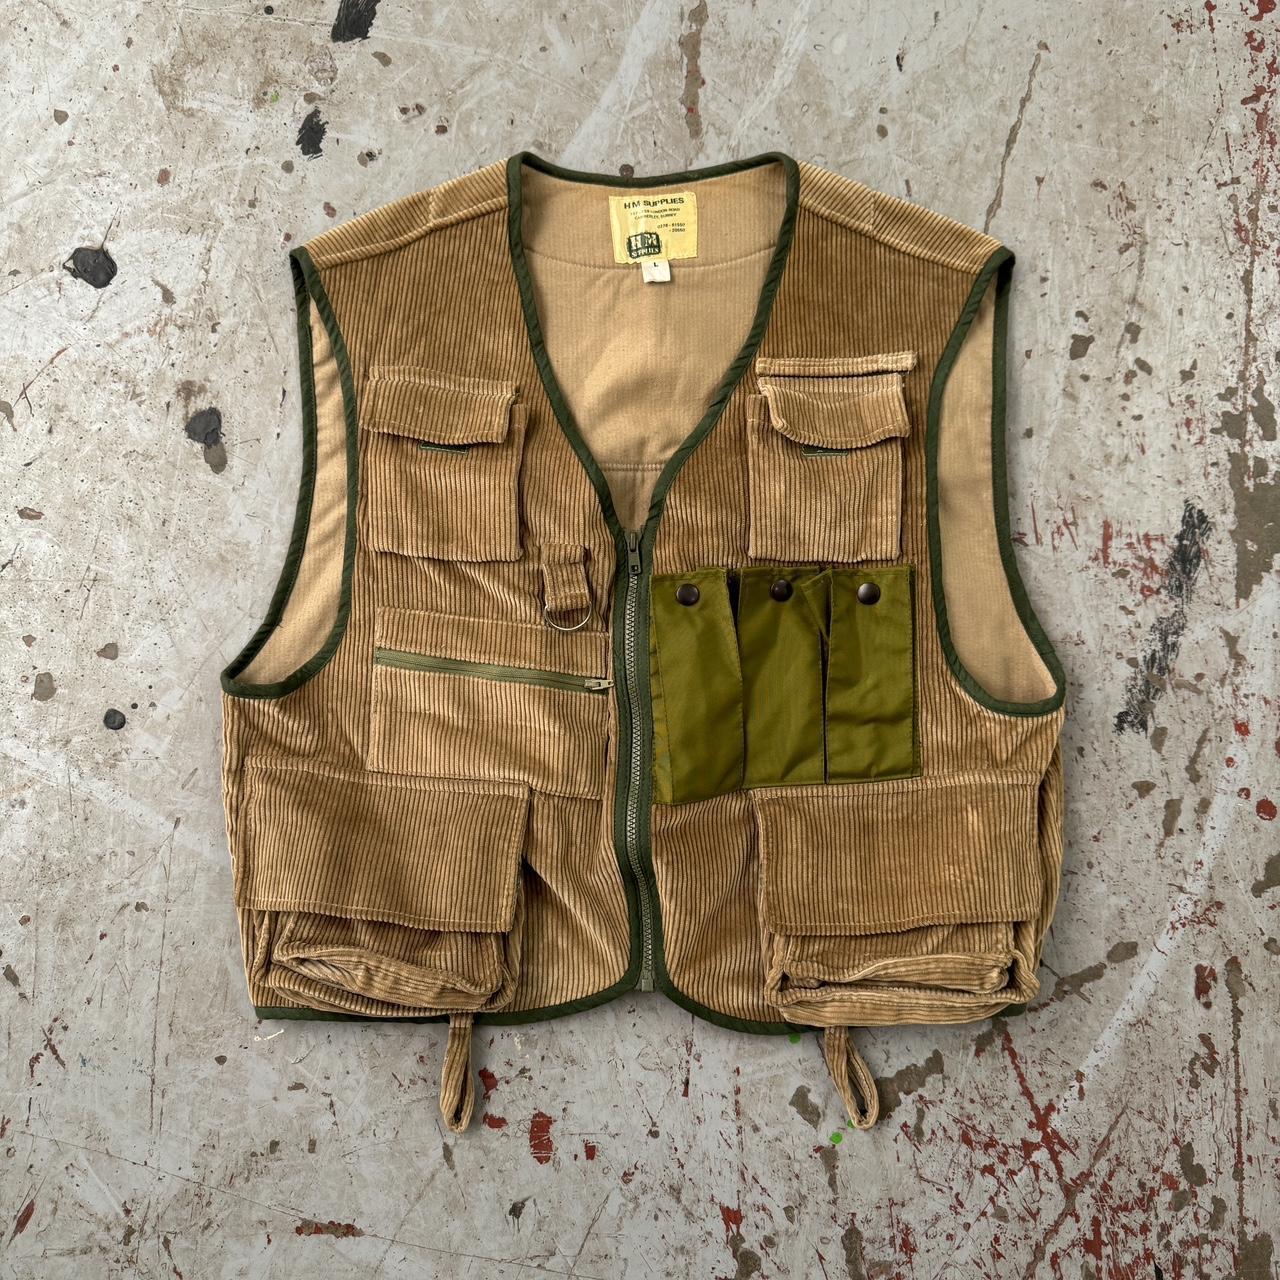 Vintage 80’s made in England utility fishing vest....